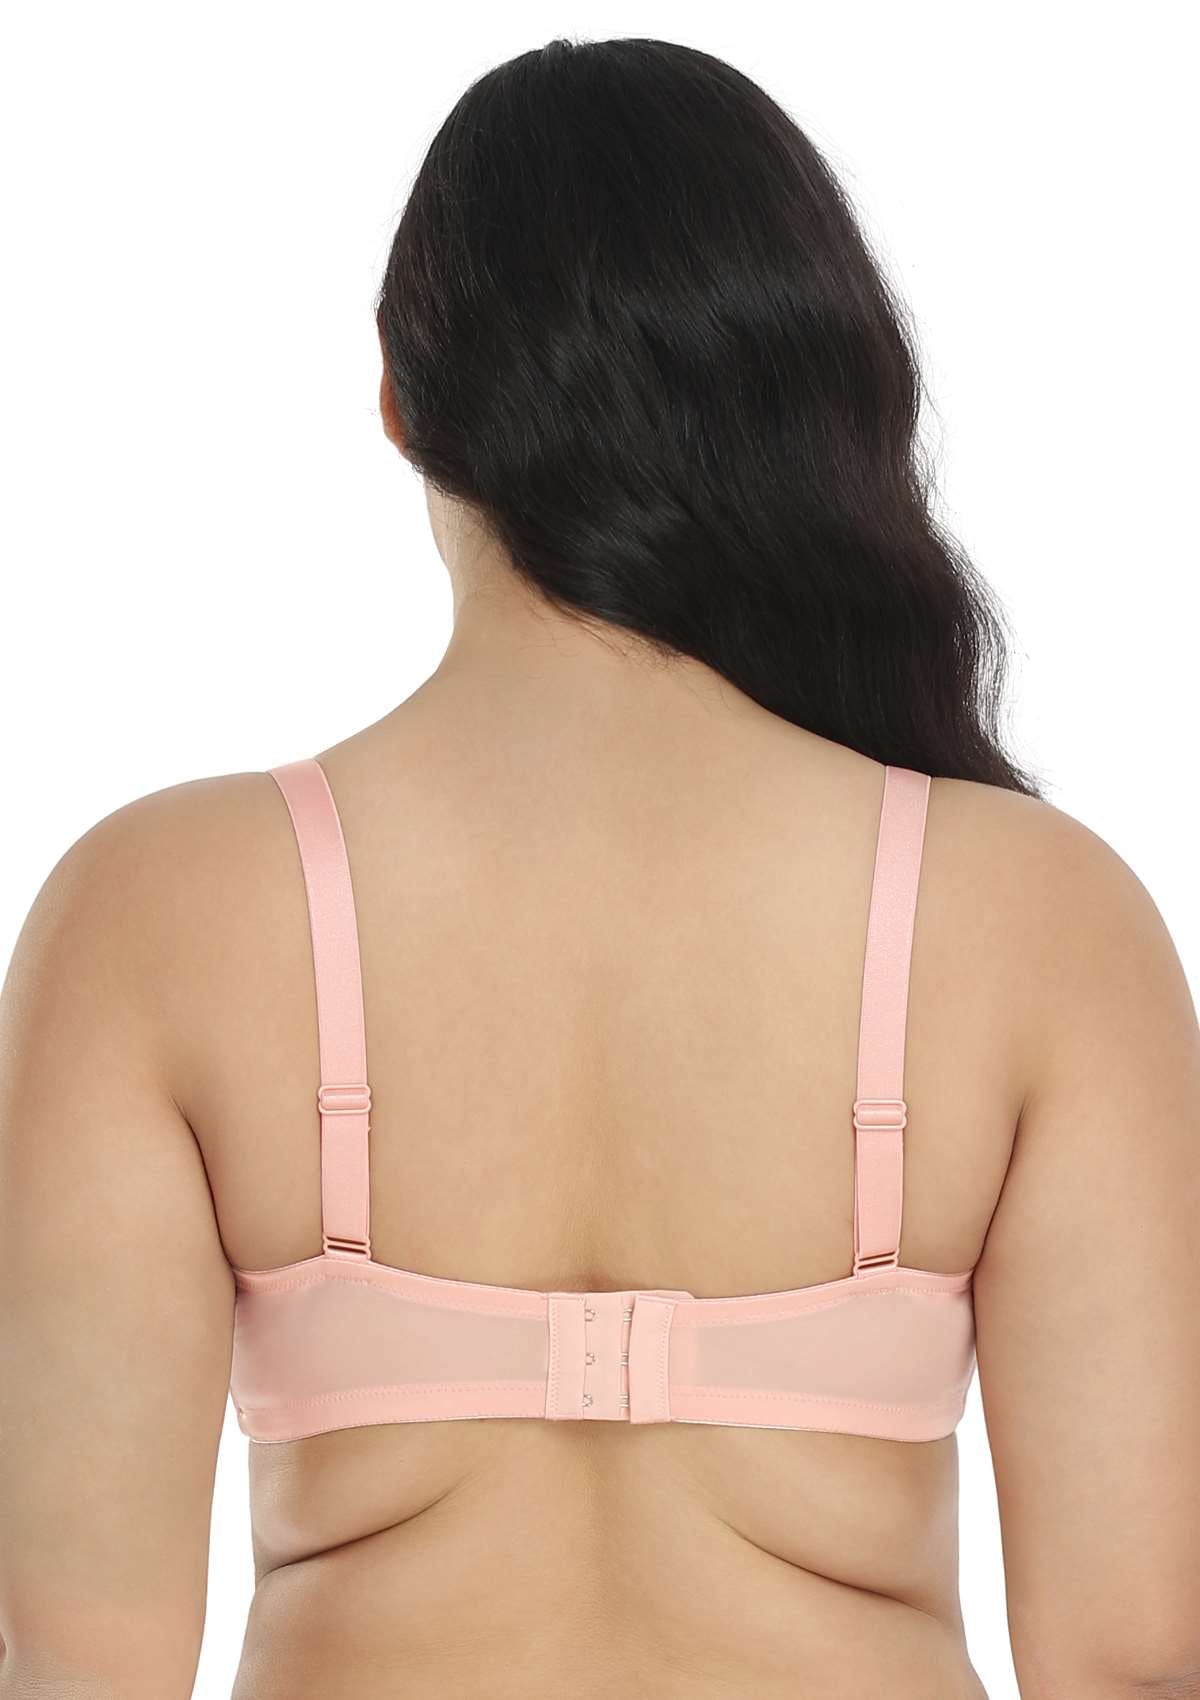 HSIA Rosa Bonica Sheer Lace Mesh Unlined Thin Comfy Woman Bra - Pink / 40 / C